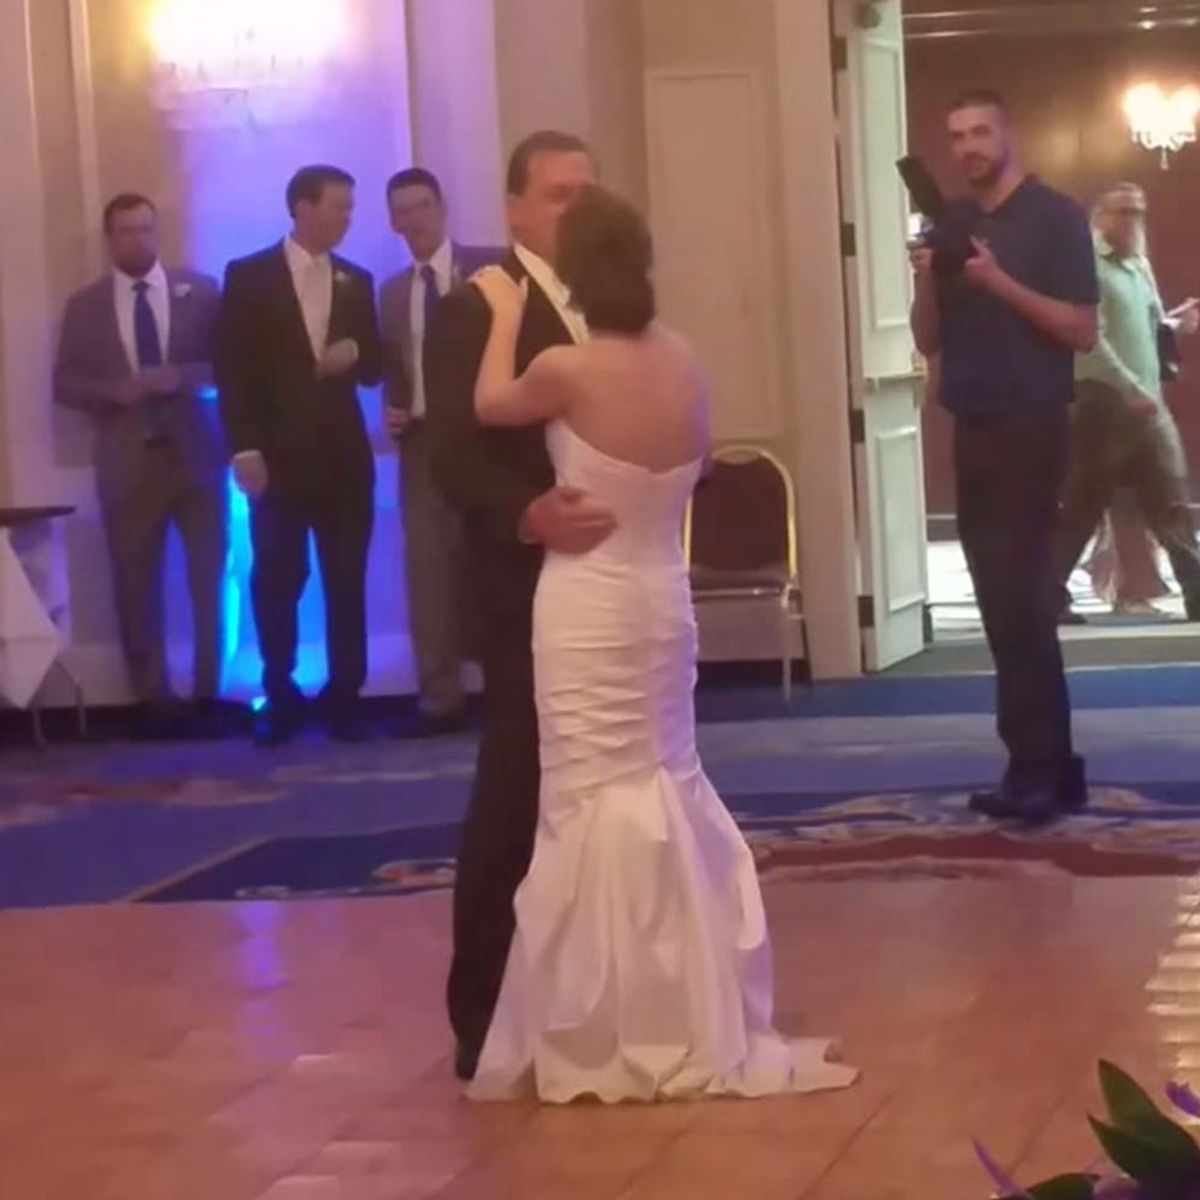 This Bride Is Starting an Awesome New Father-Daughter Dance Trend